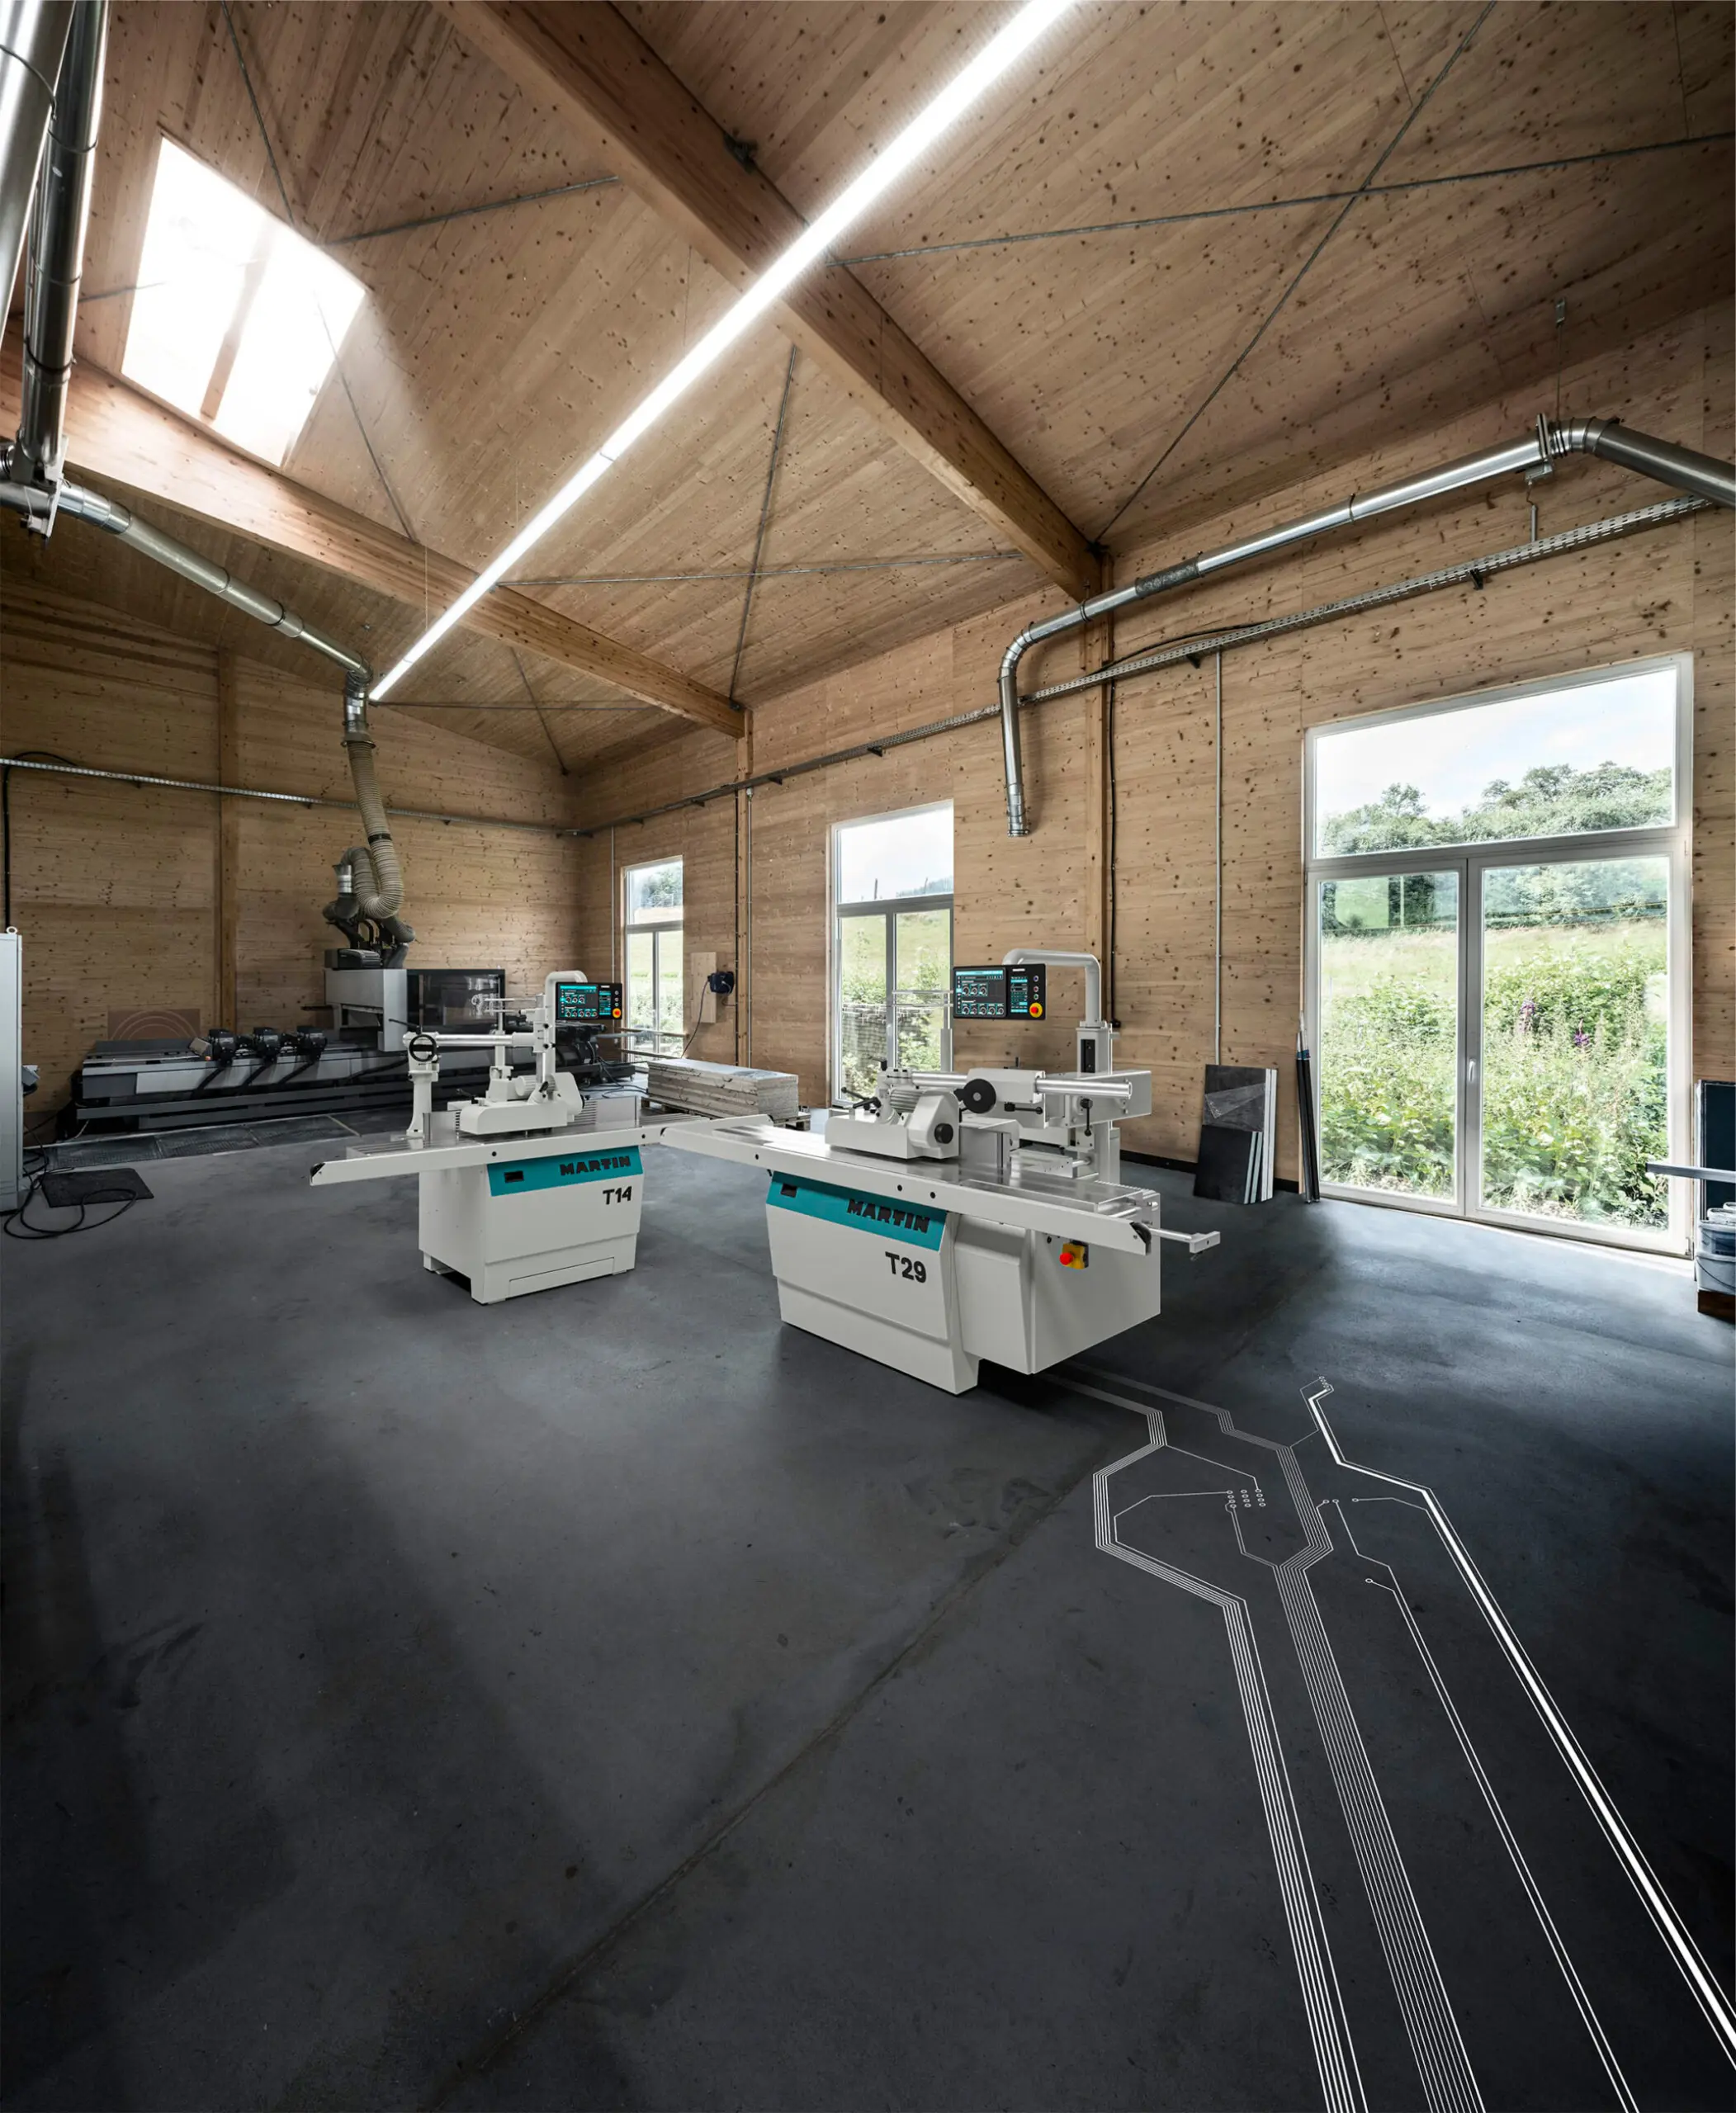 advertising photo of an interior of a large industrial workshop with a 3d rendered woodworking machine